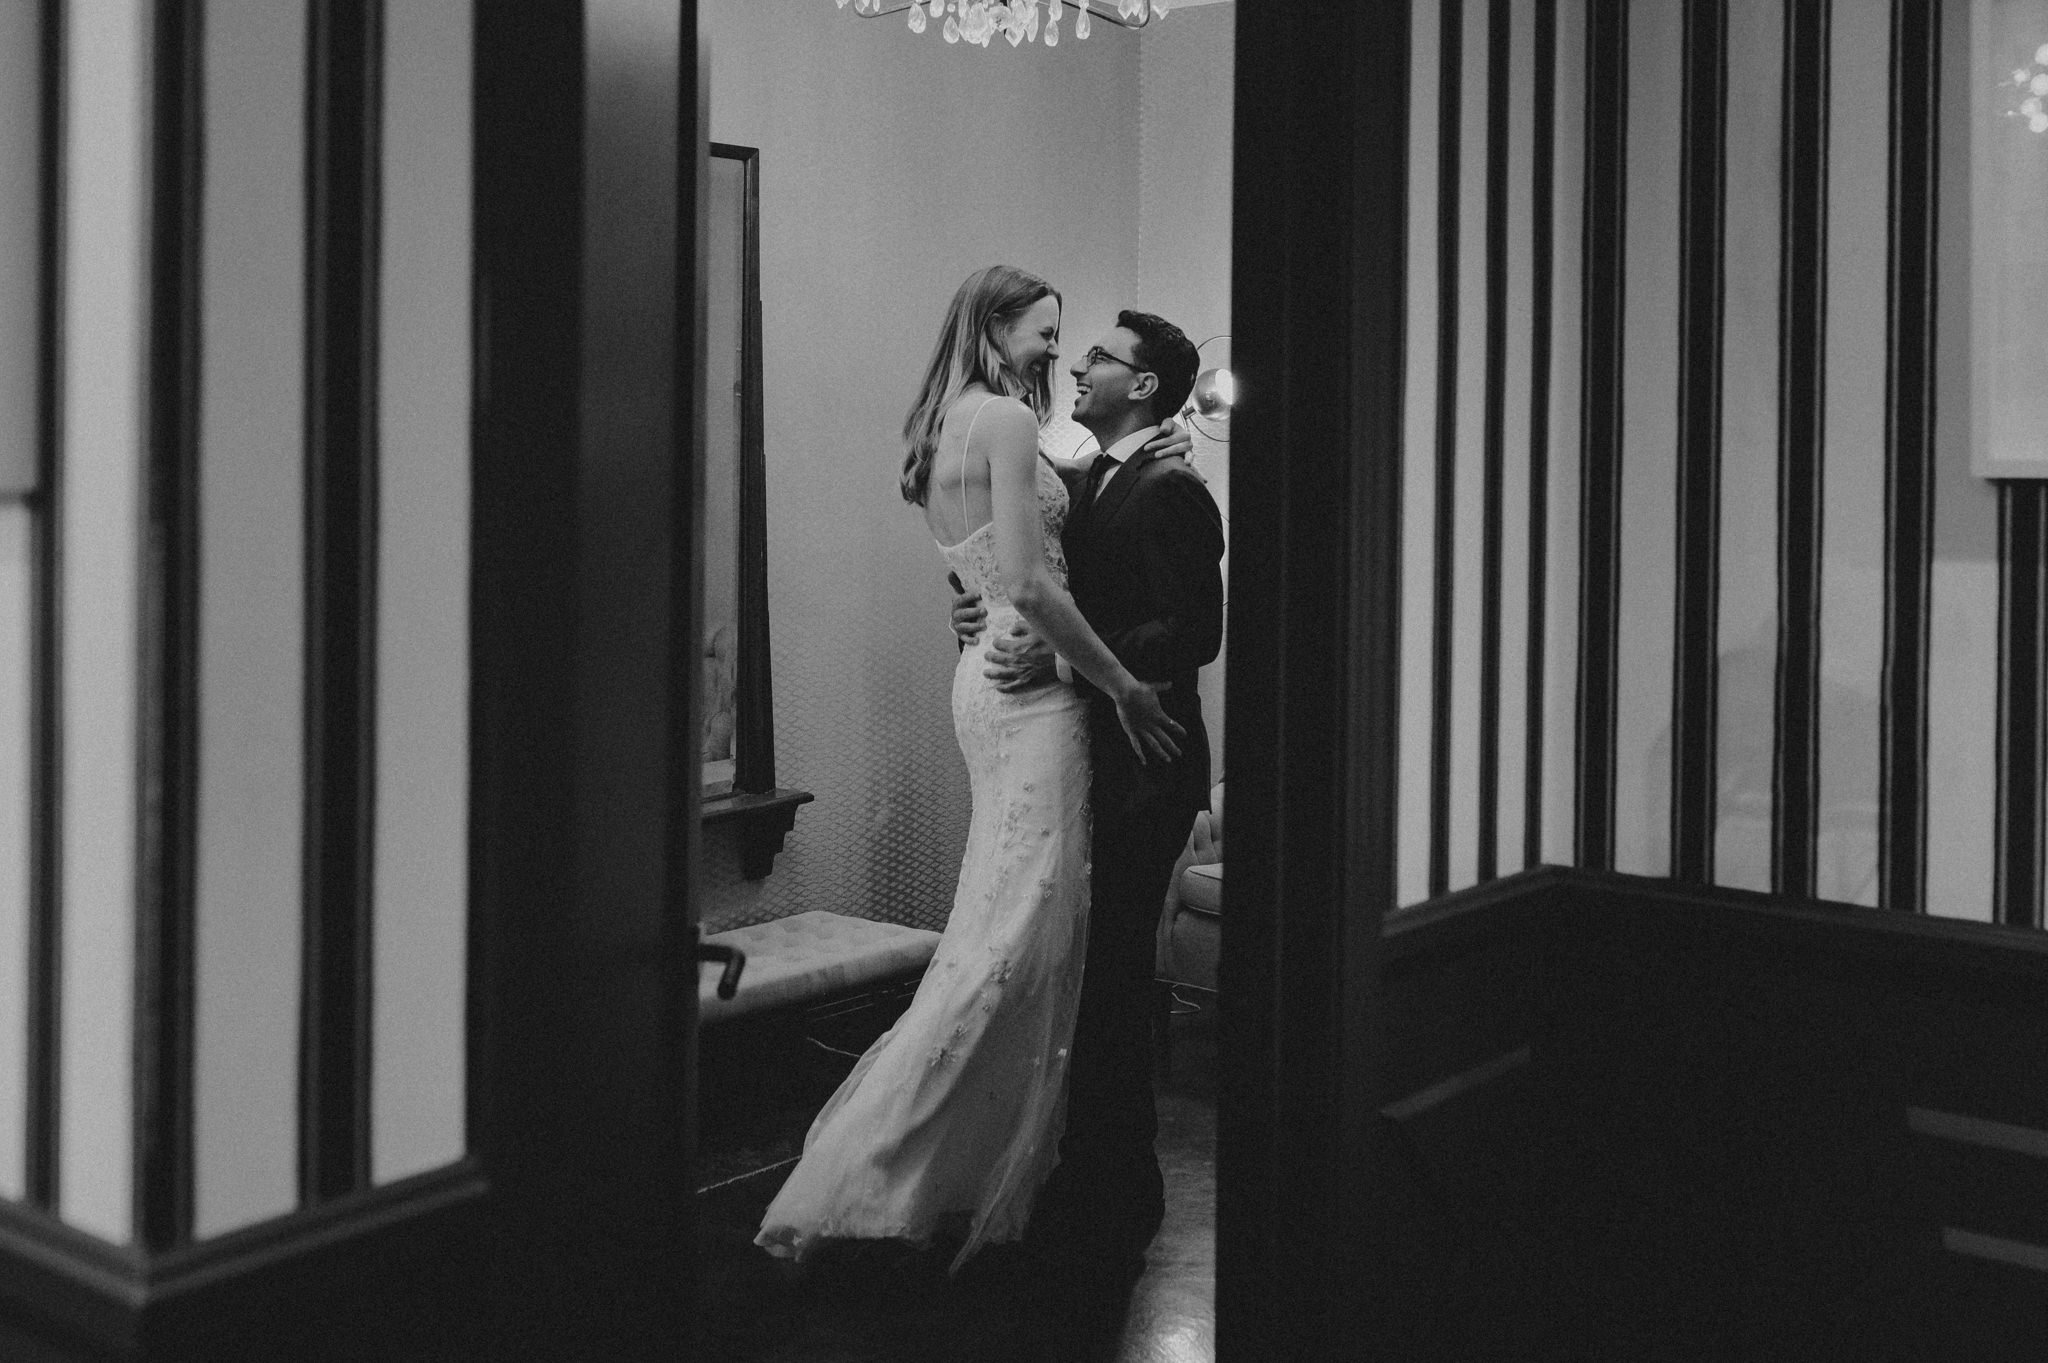 the fig house wedding - queer wedding photographers in los angeles - itlaphoto.com-47.jpg